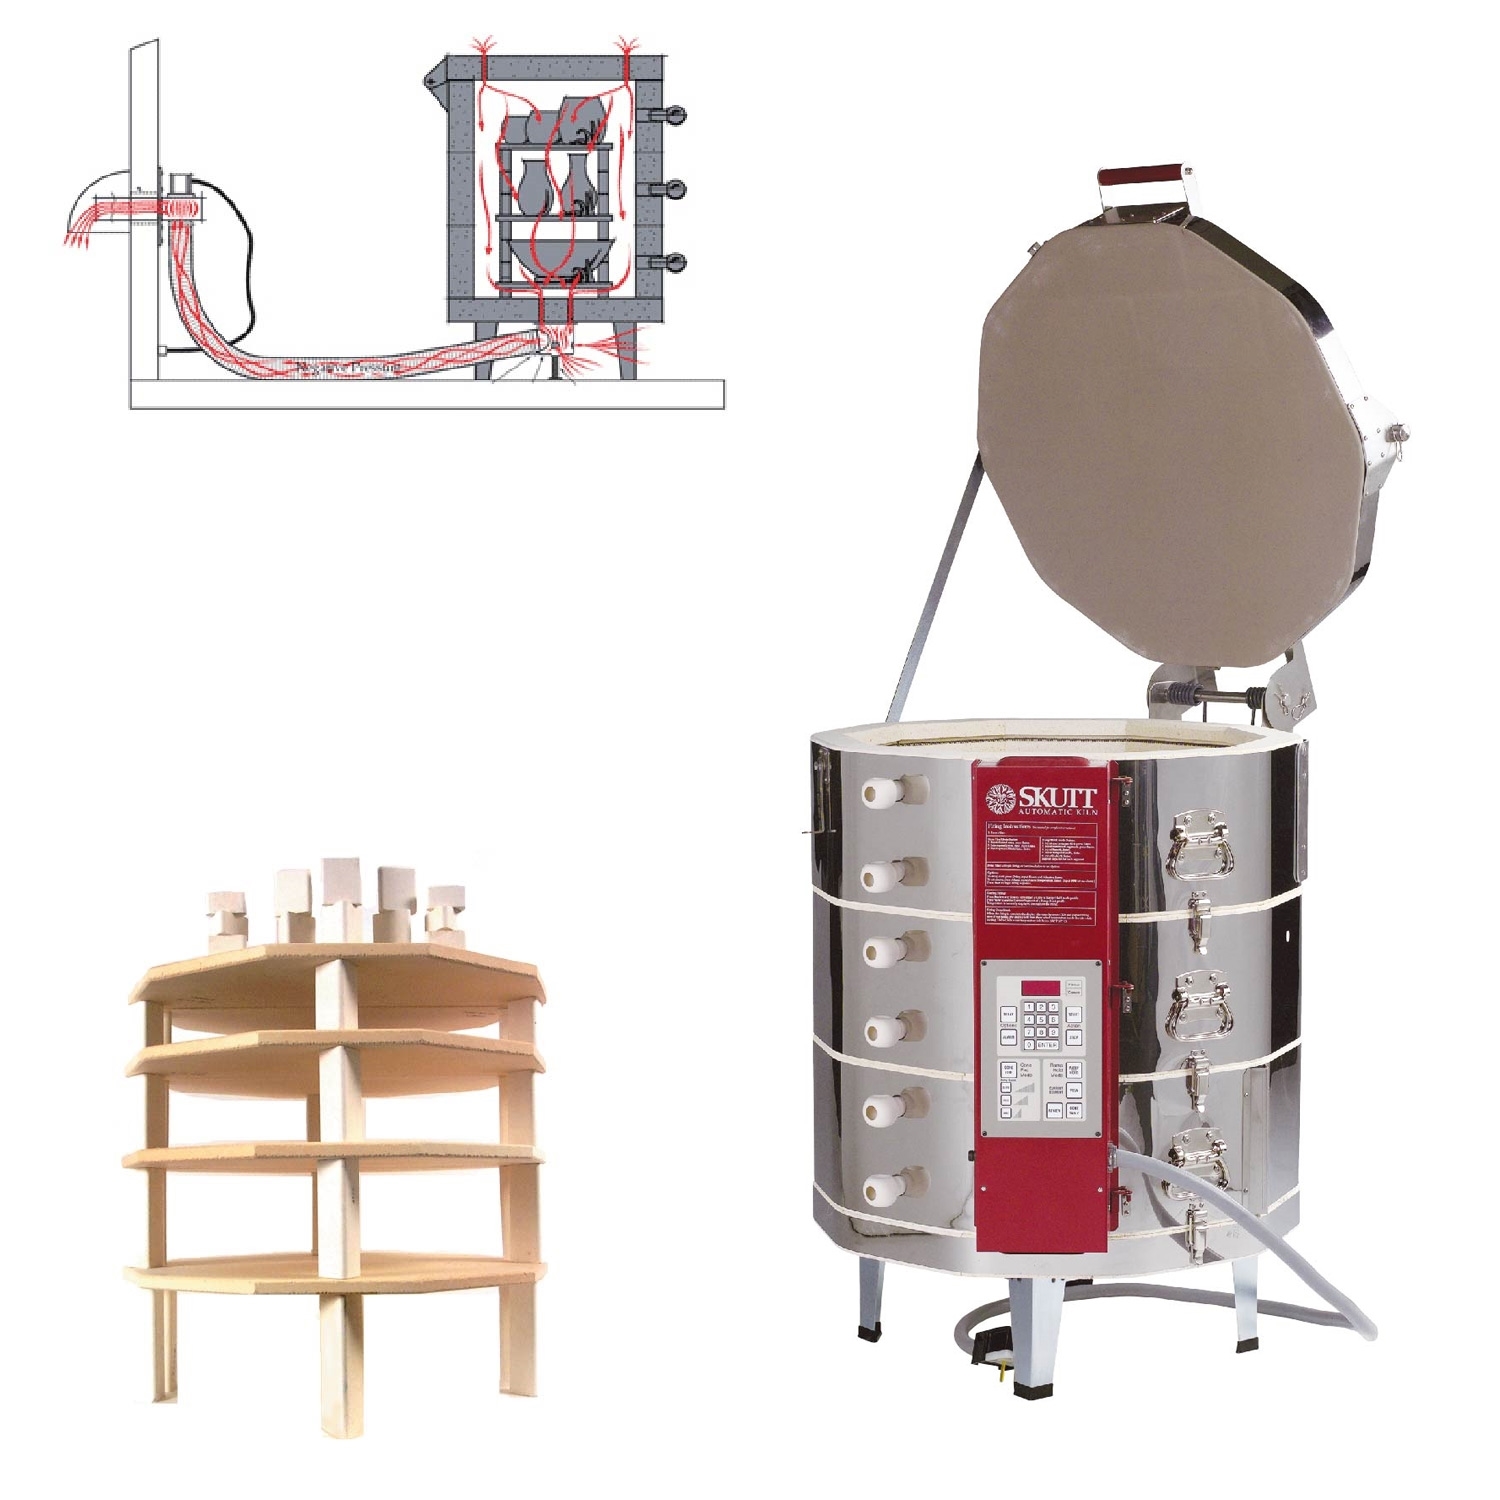 Skutt Kiln KM1027 Package with Vent and Furniture Kit